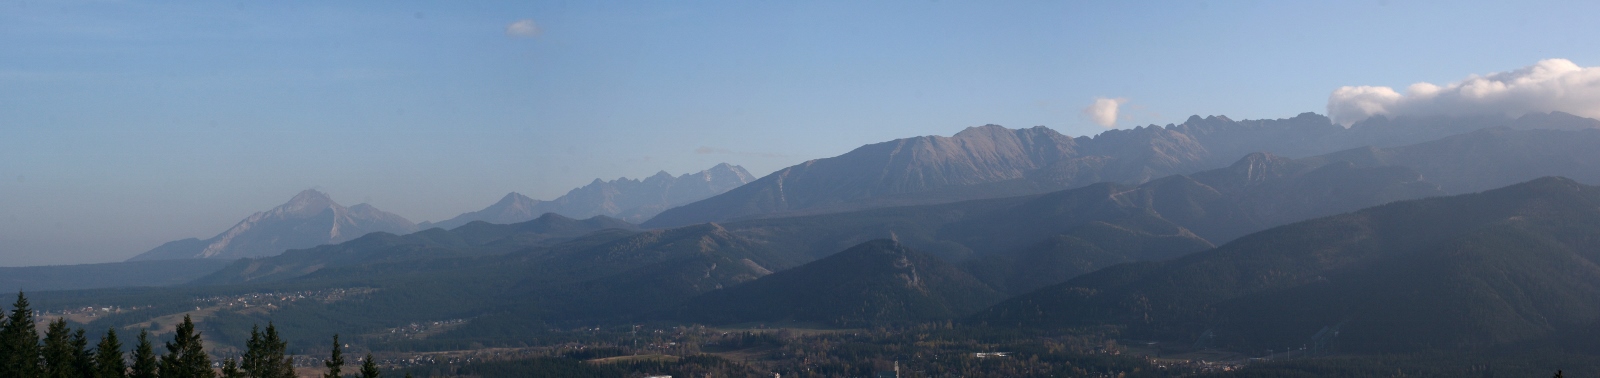 Tatry picture 35709